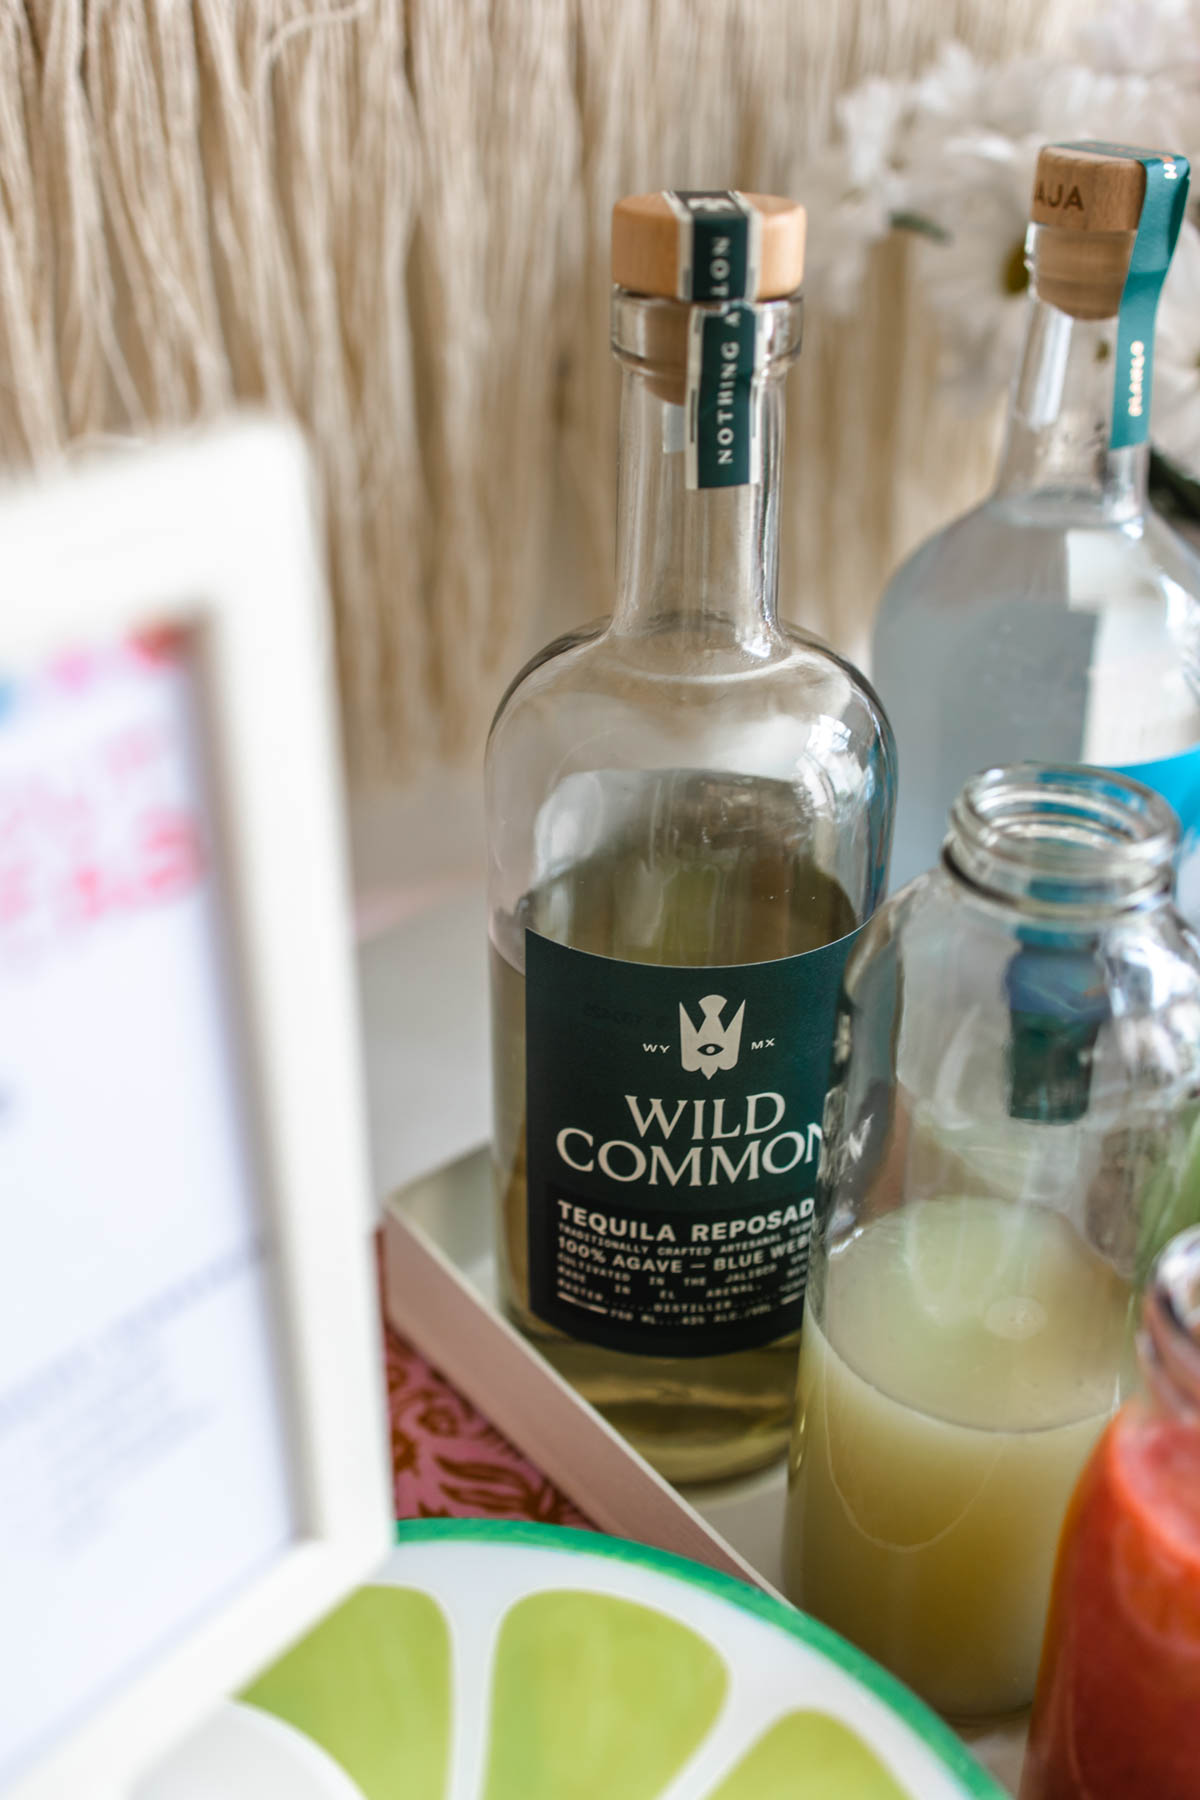 A bottle of Wild Common Tequila Reposado behind a bottle of fruit juice.